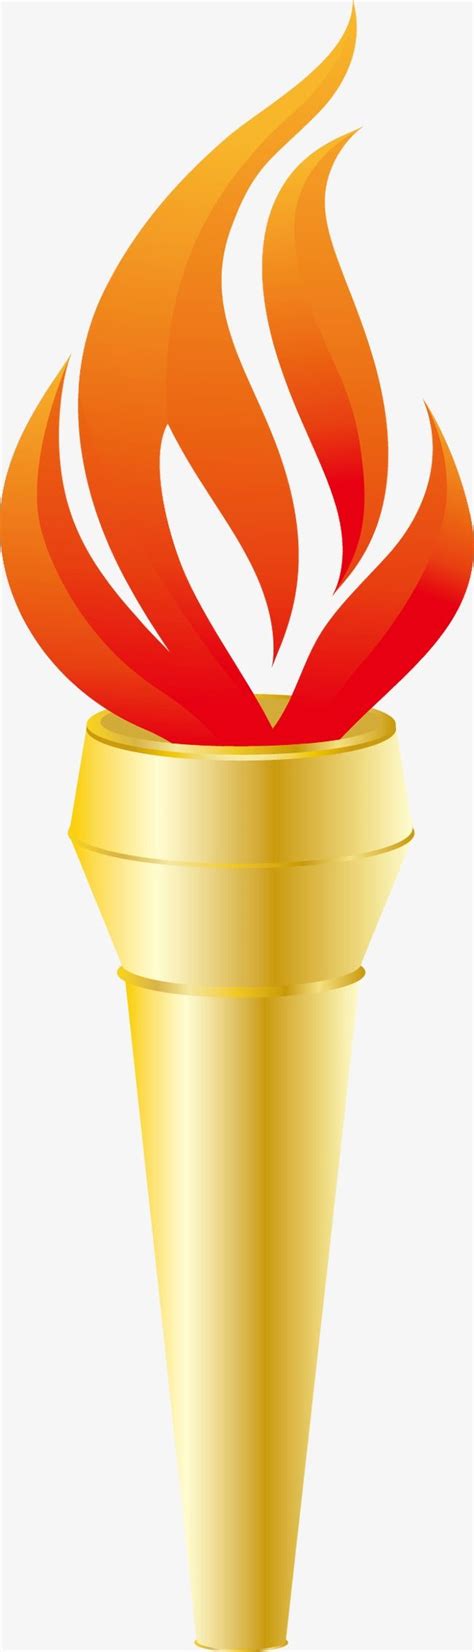 Olympic Torch Silhouette Png Free Burning Torch Vector Silhouettes